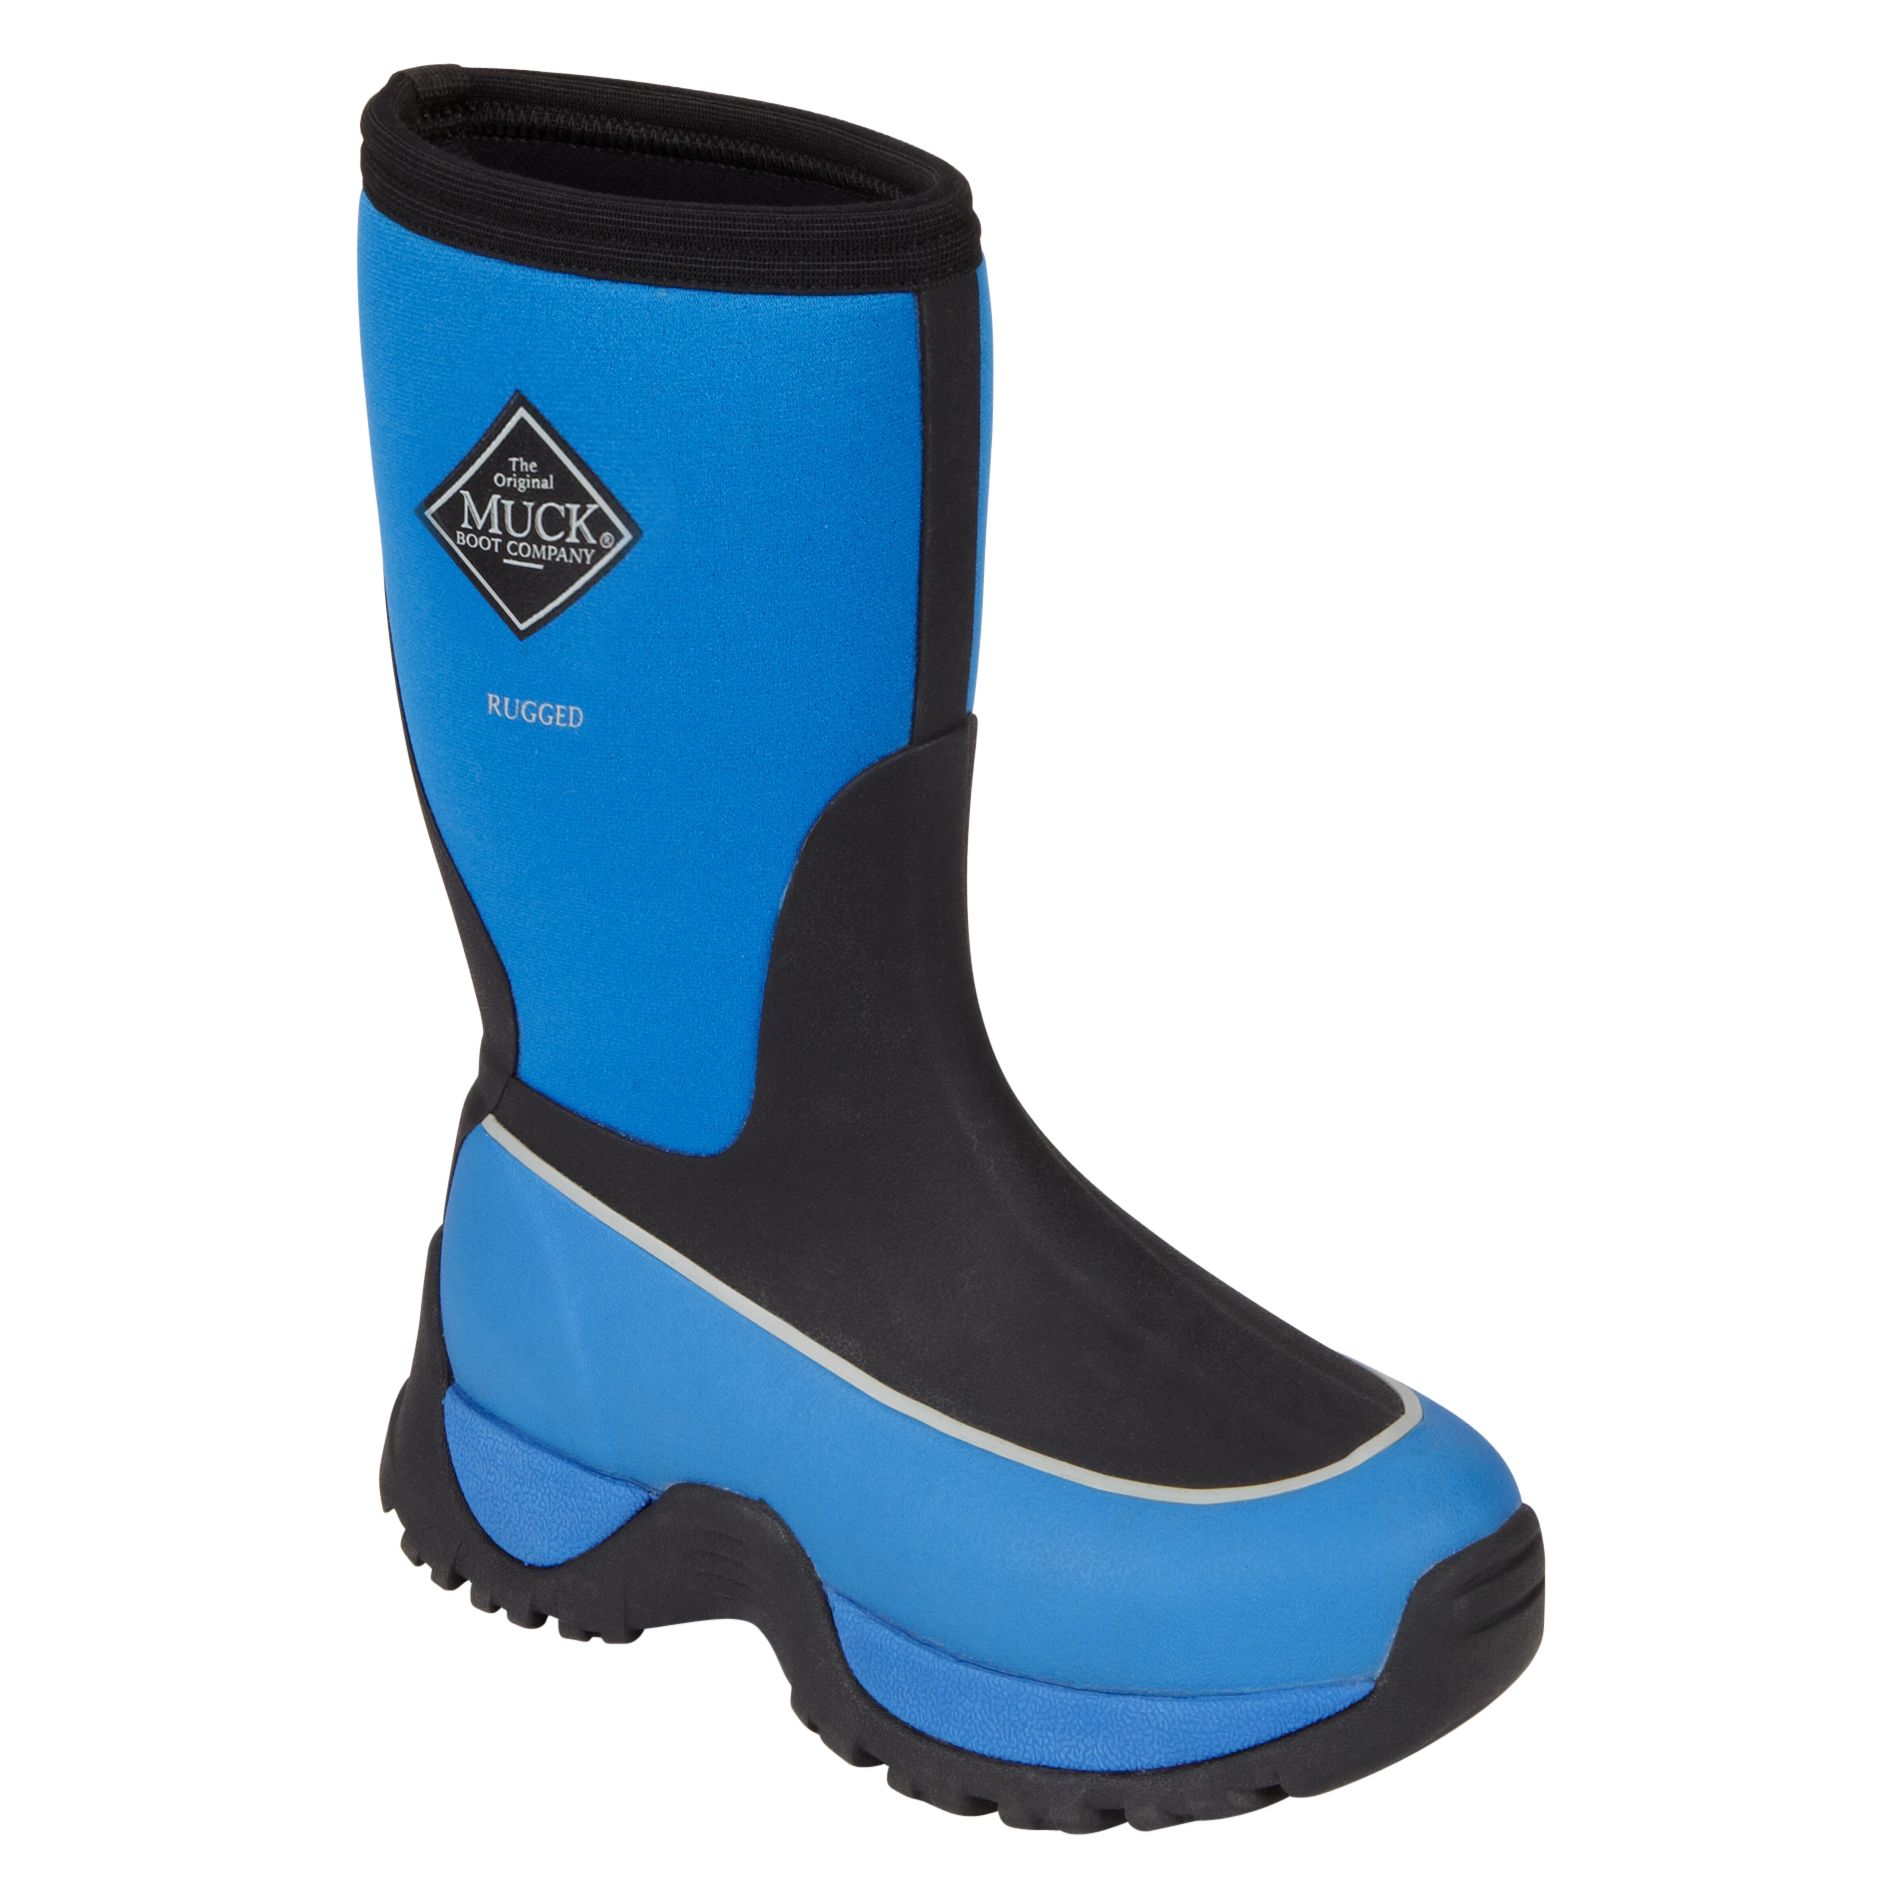 The Original Muck Boot Company Boy's Boot Rugged - Blue